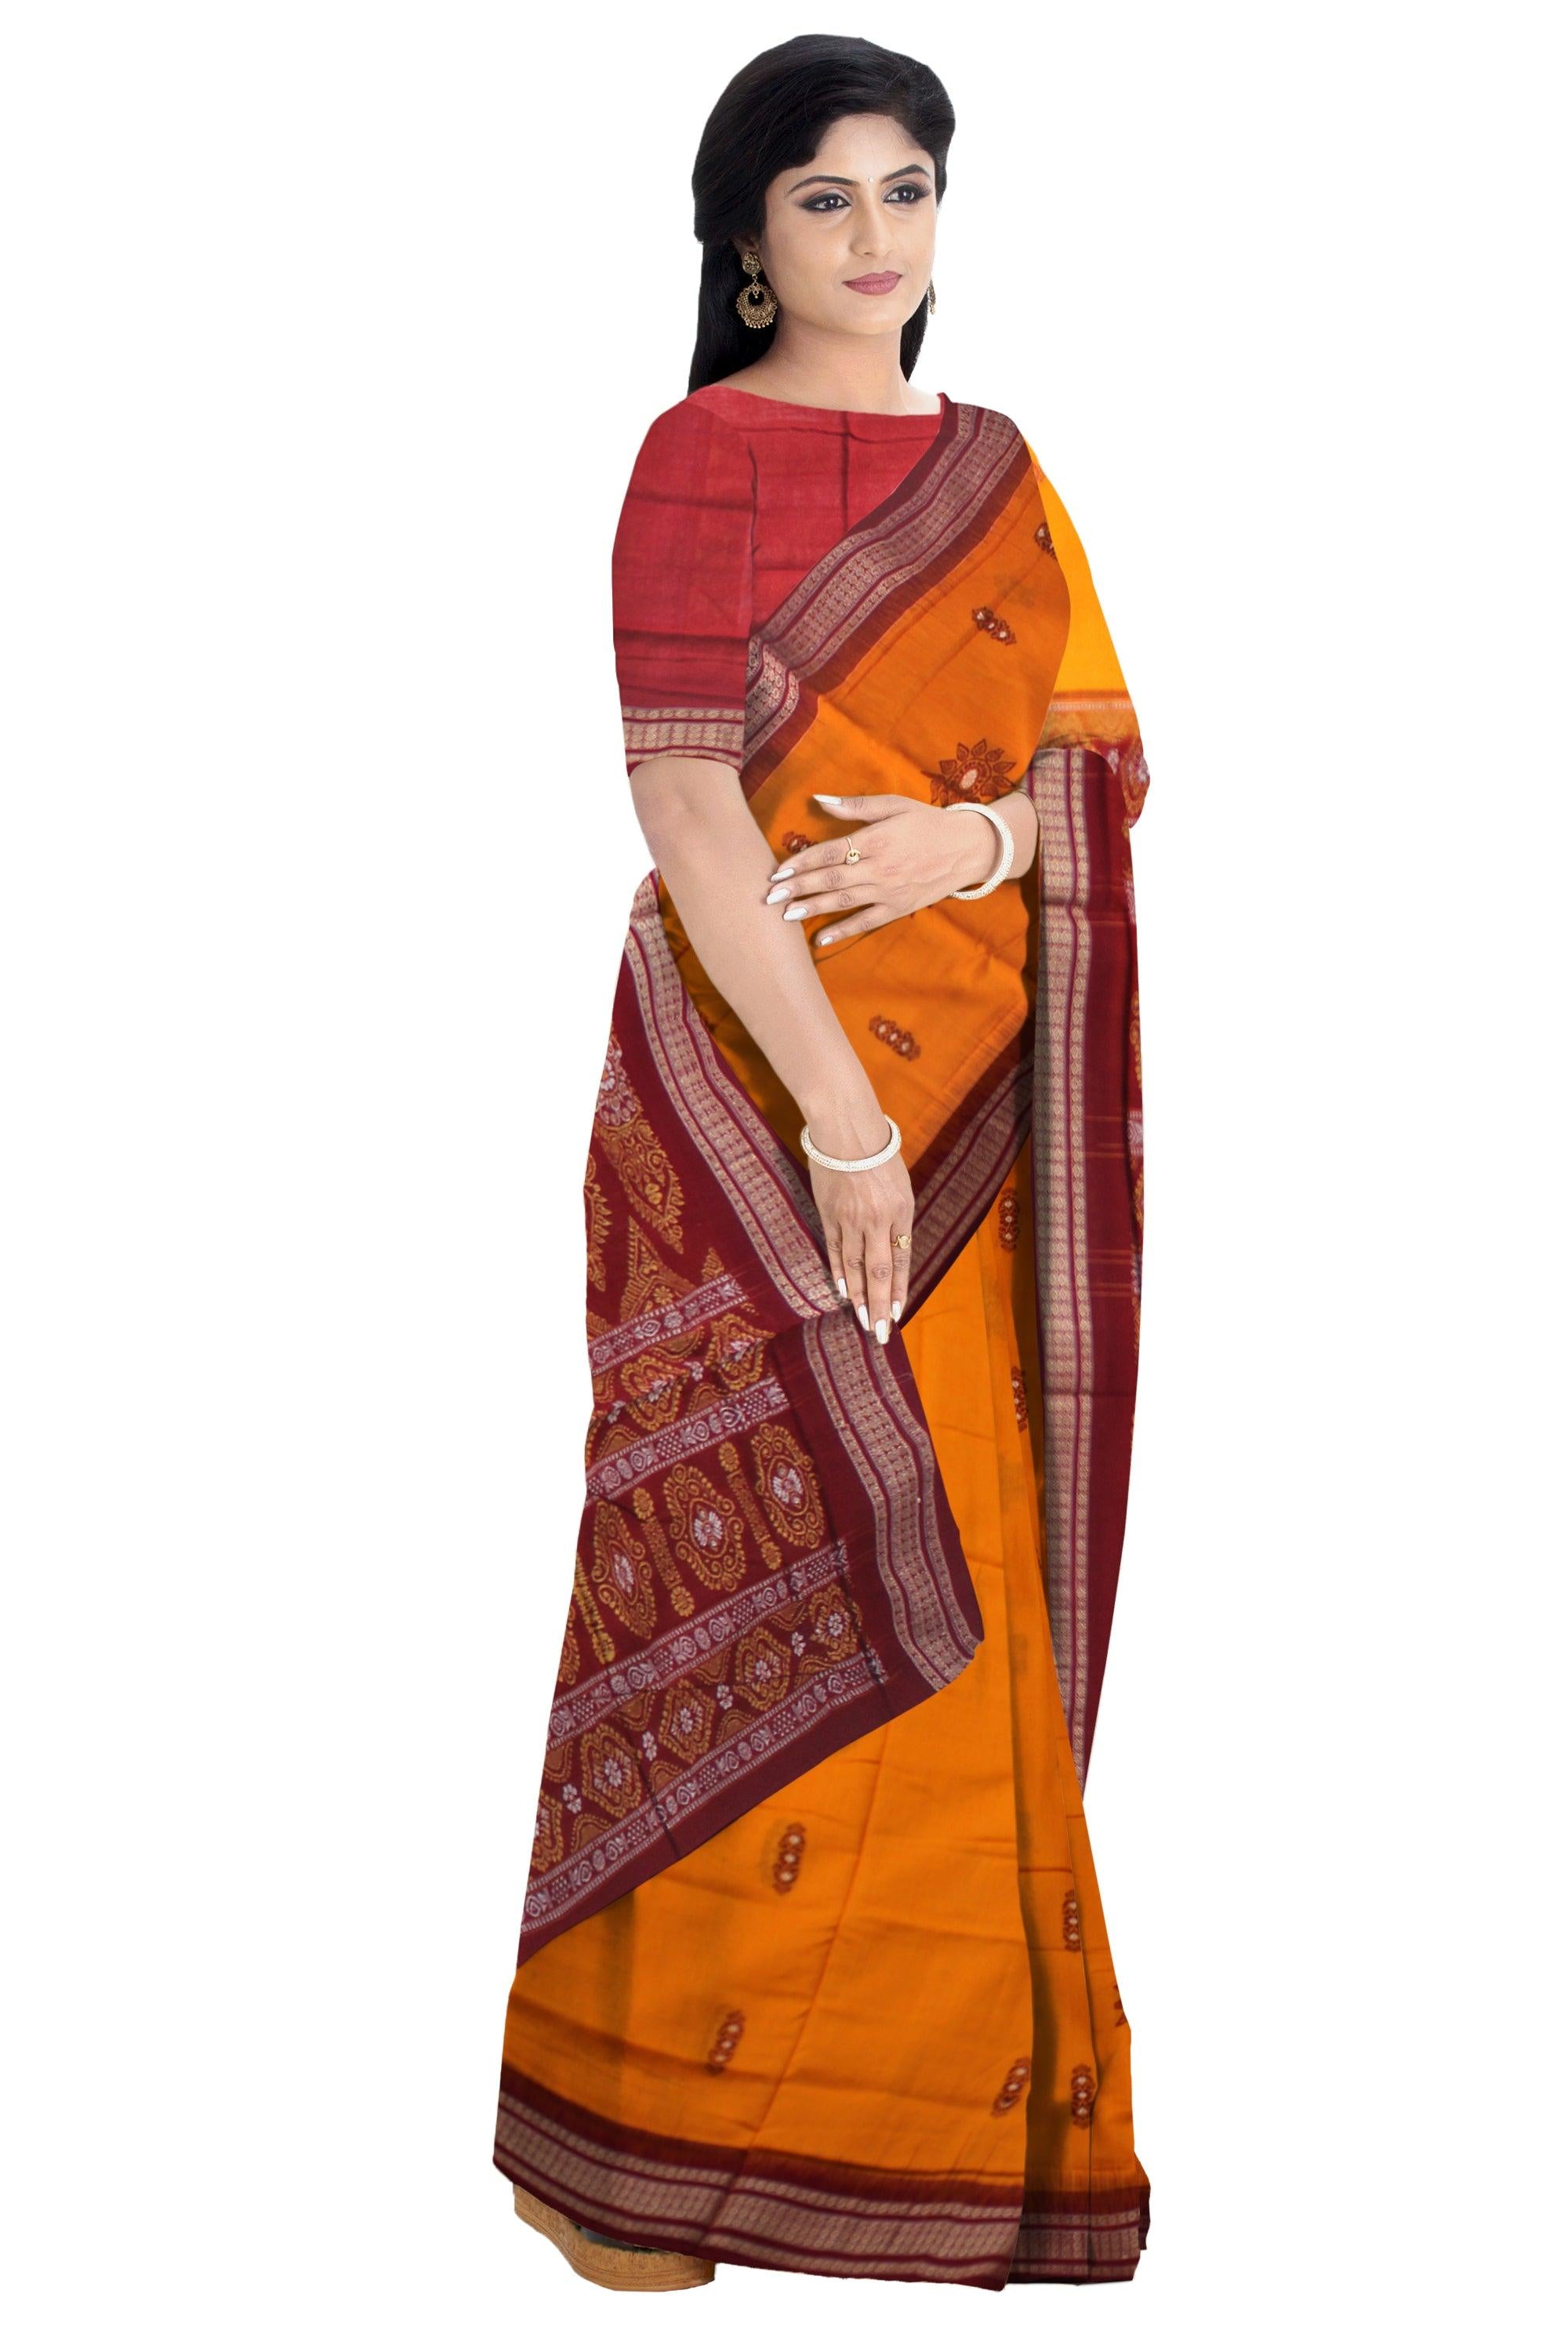 COTTON HANDLOOM BOMKEI  PATTERN SAREE IN YELOOW AND MAROON COLOR, WITH BLOUSE PIECE. - Koshali Arts & Crafts Enterprise